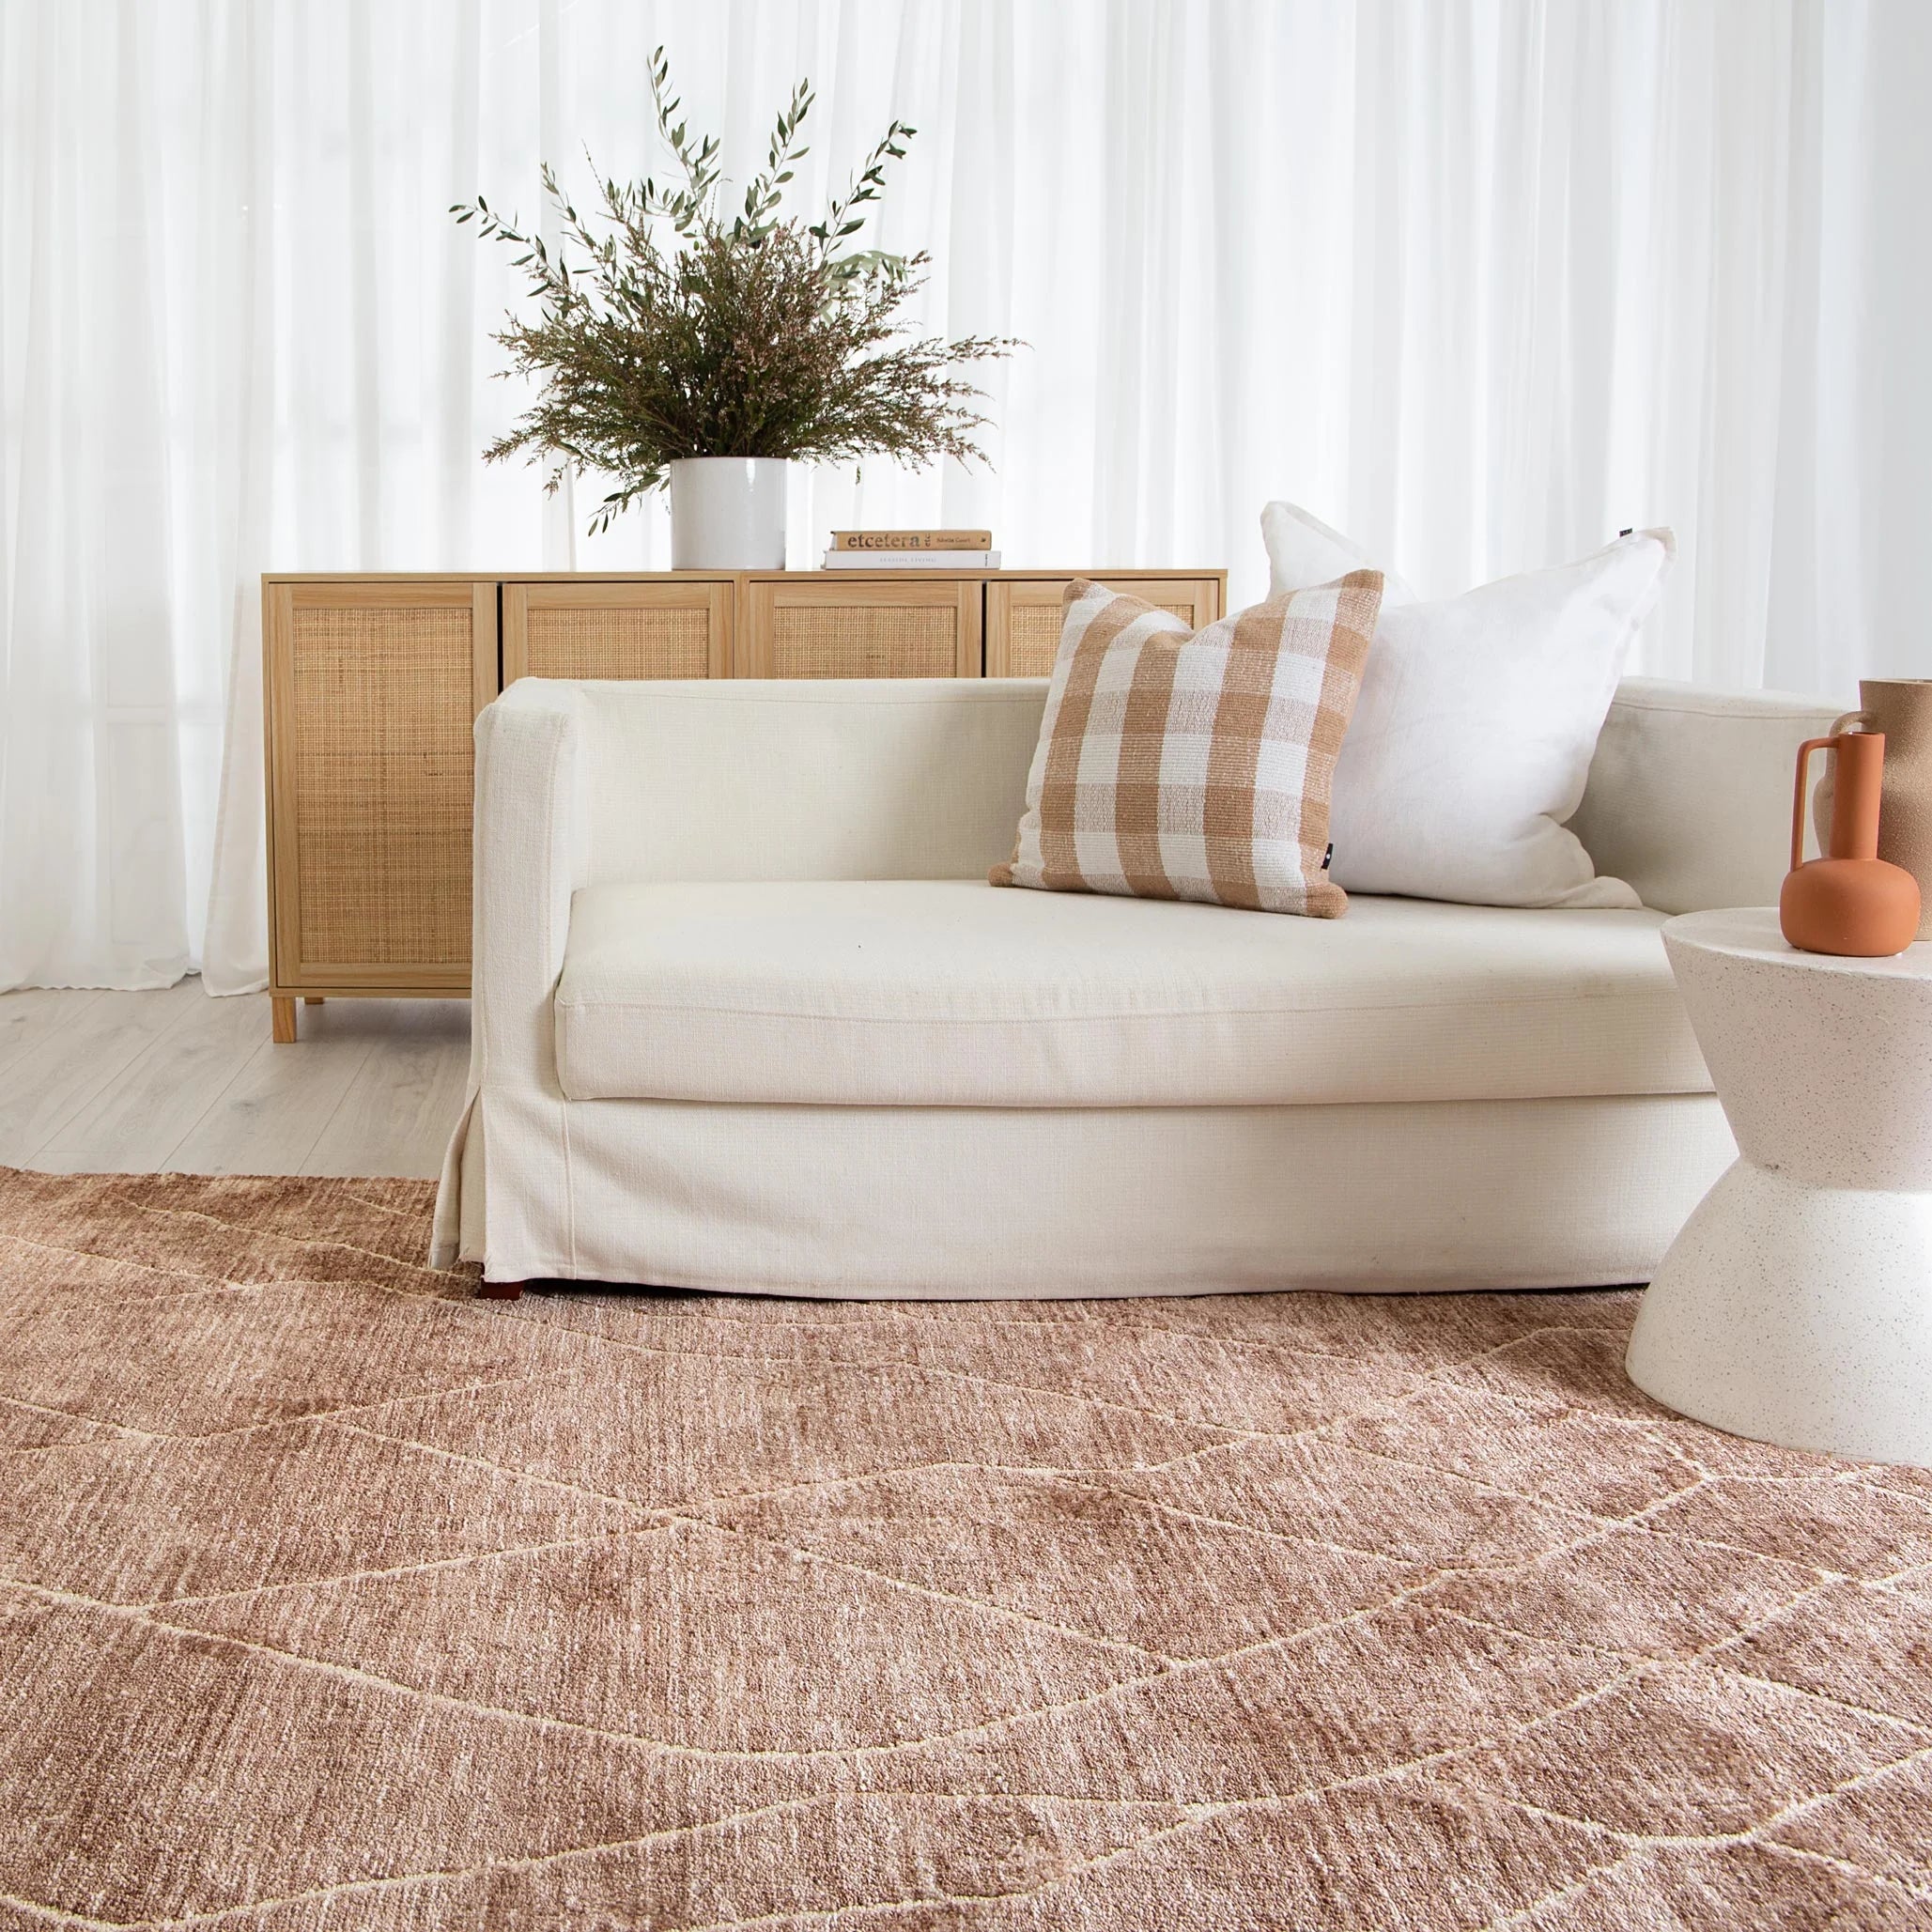 Kendra Rug elegantly placed in a room, demonstrating its adaptability and charm in a home environment.